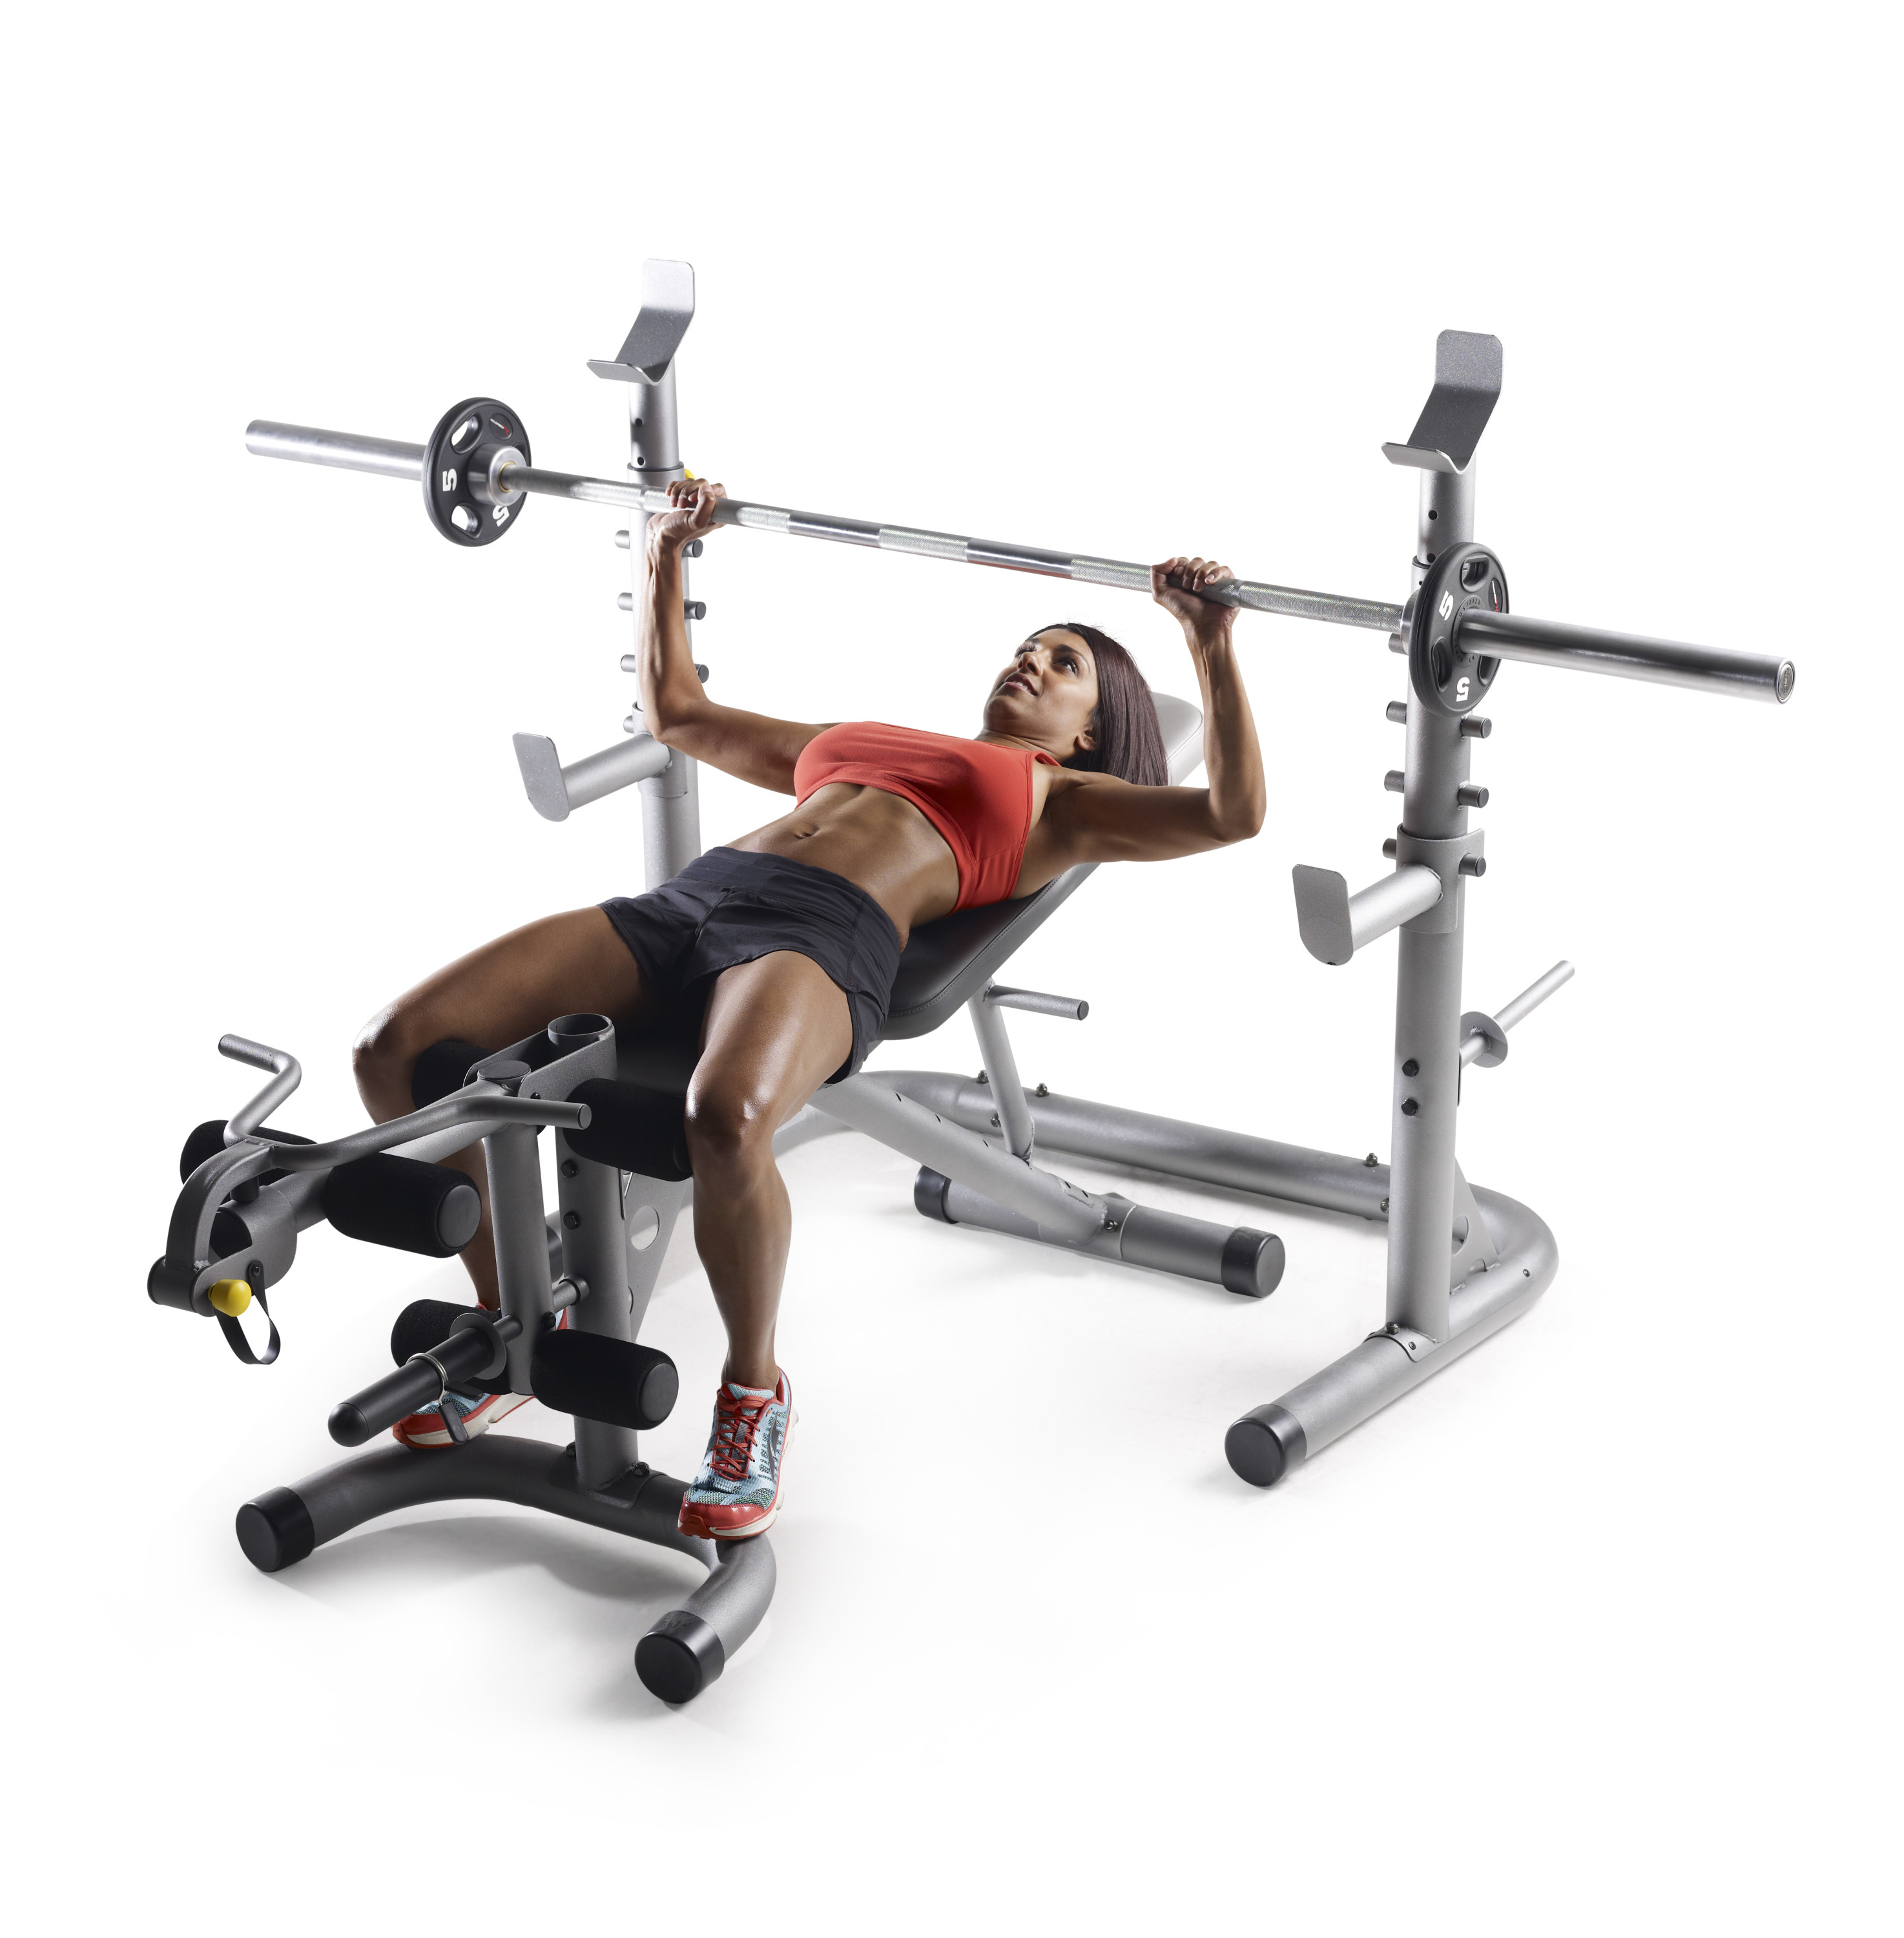 Weider XRS 20 Olympic Squat Rack with 300 Lb. Weight Limit - image 5 of 11